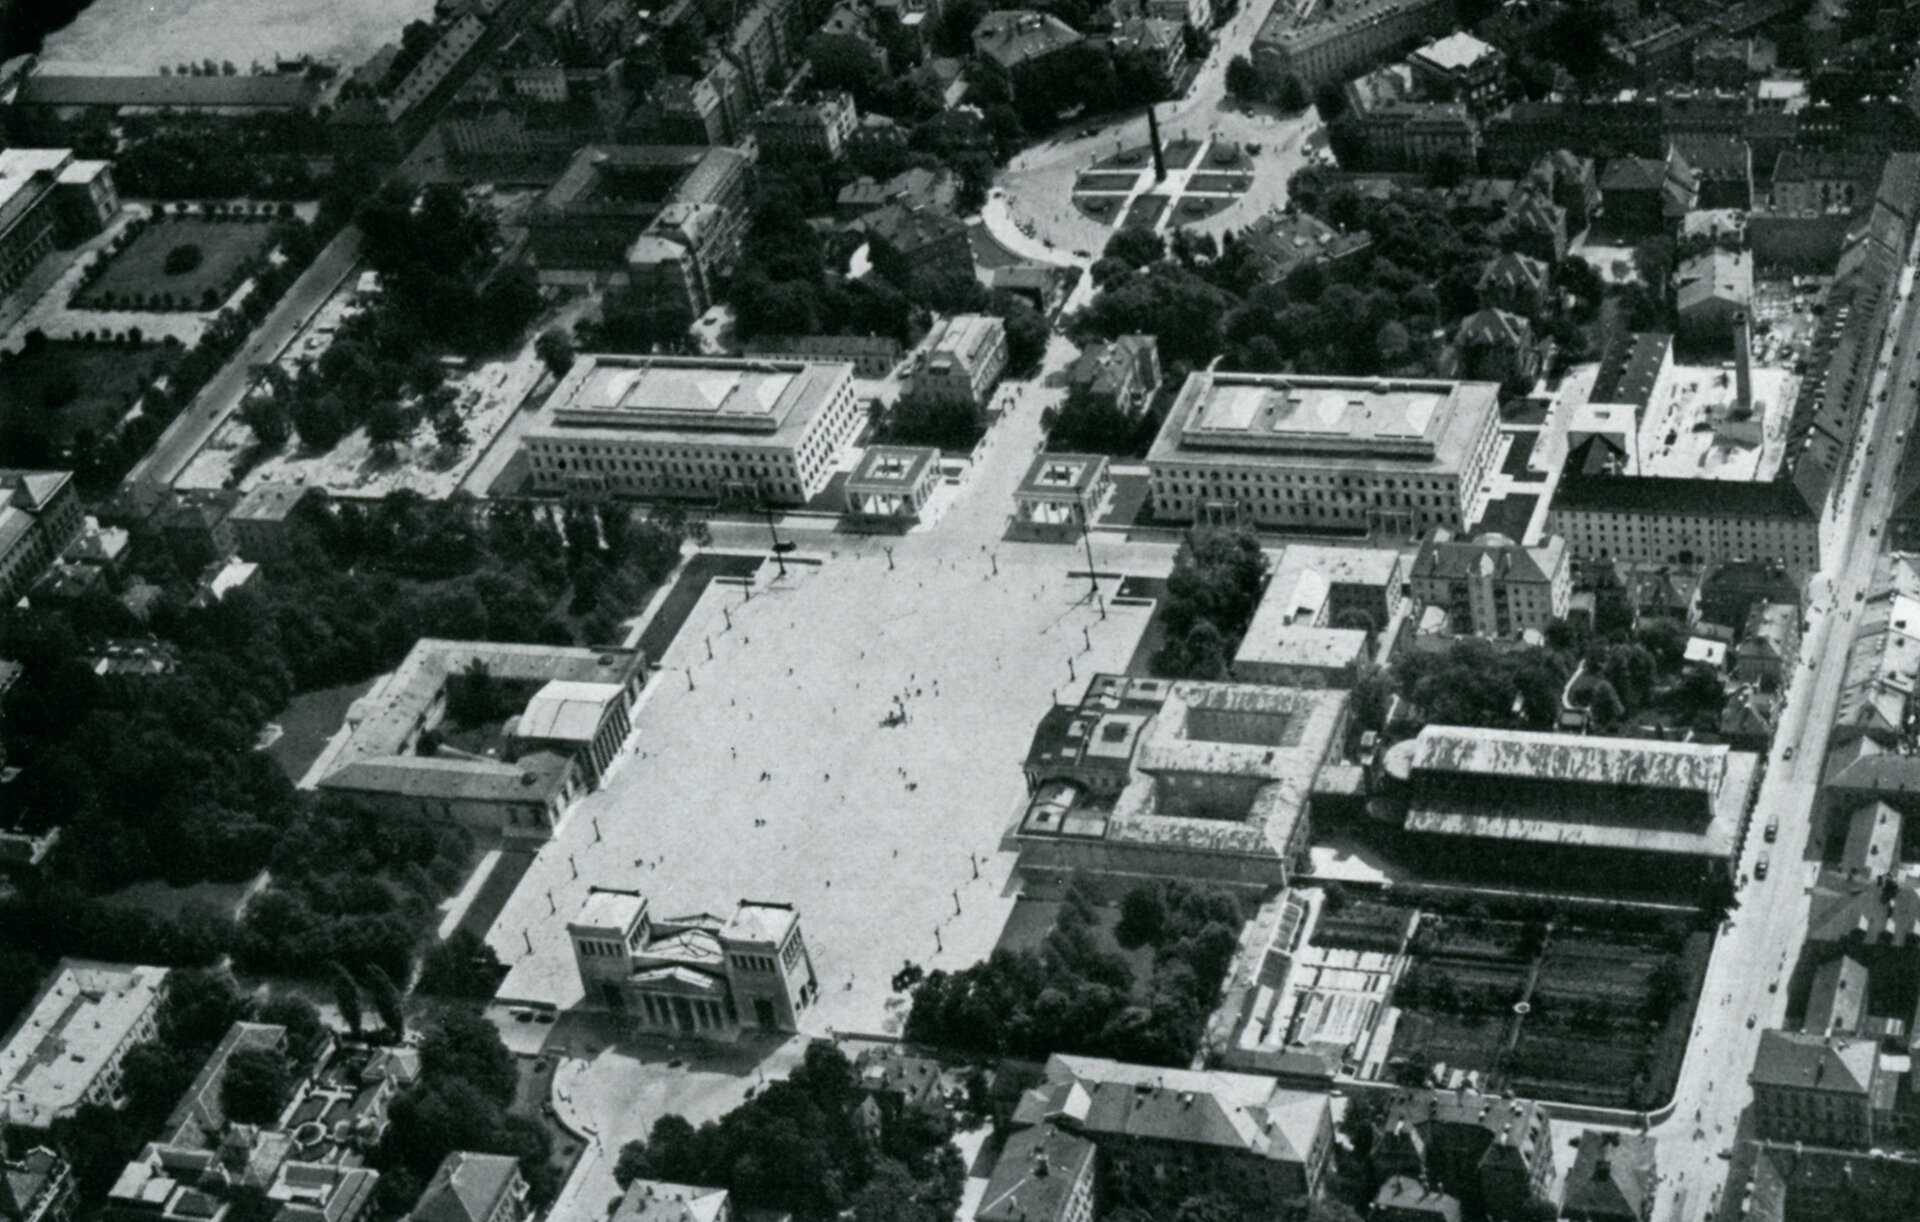 The square in the center of the photo is surrounded by a number of buildings and streets. 